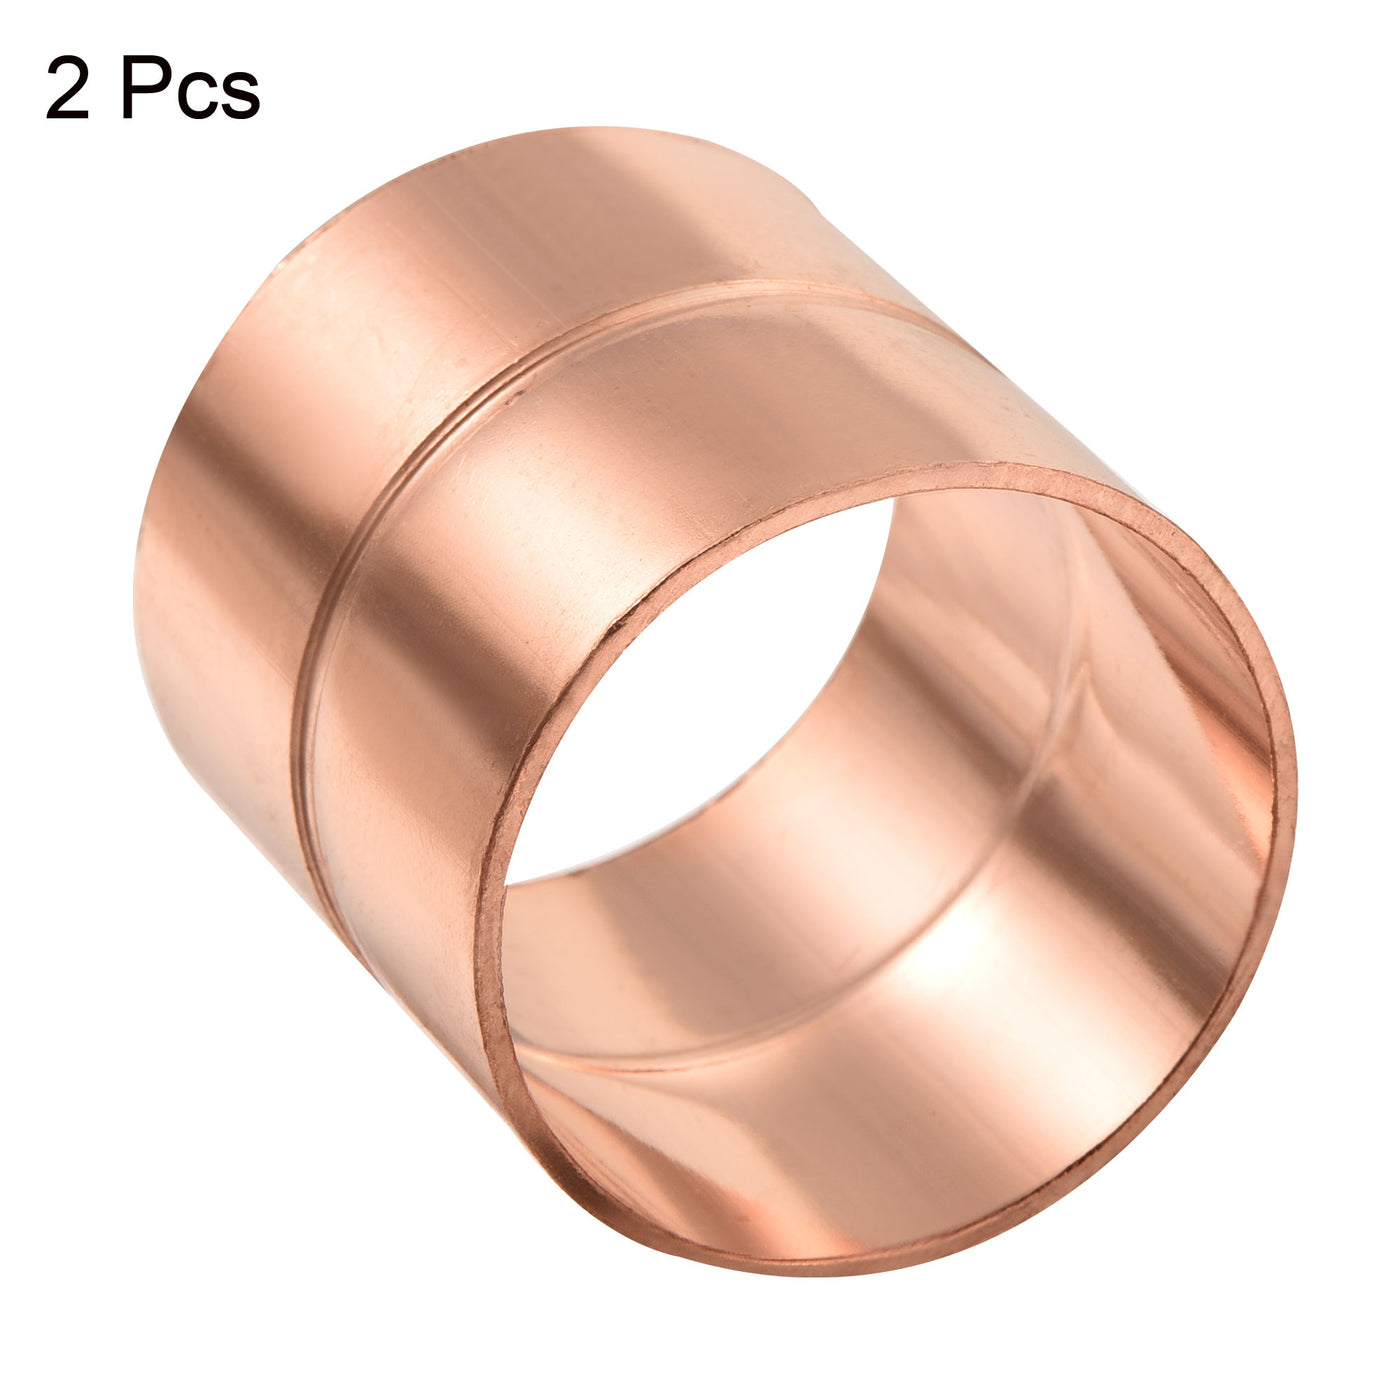 Harfington Straight Copper Coupling Fittings, 1.5 Inch ID Welding Joint for HVAC Air Conditioner, Pack of 2